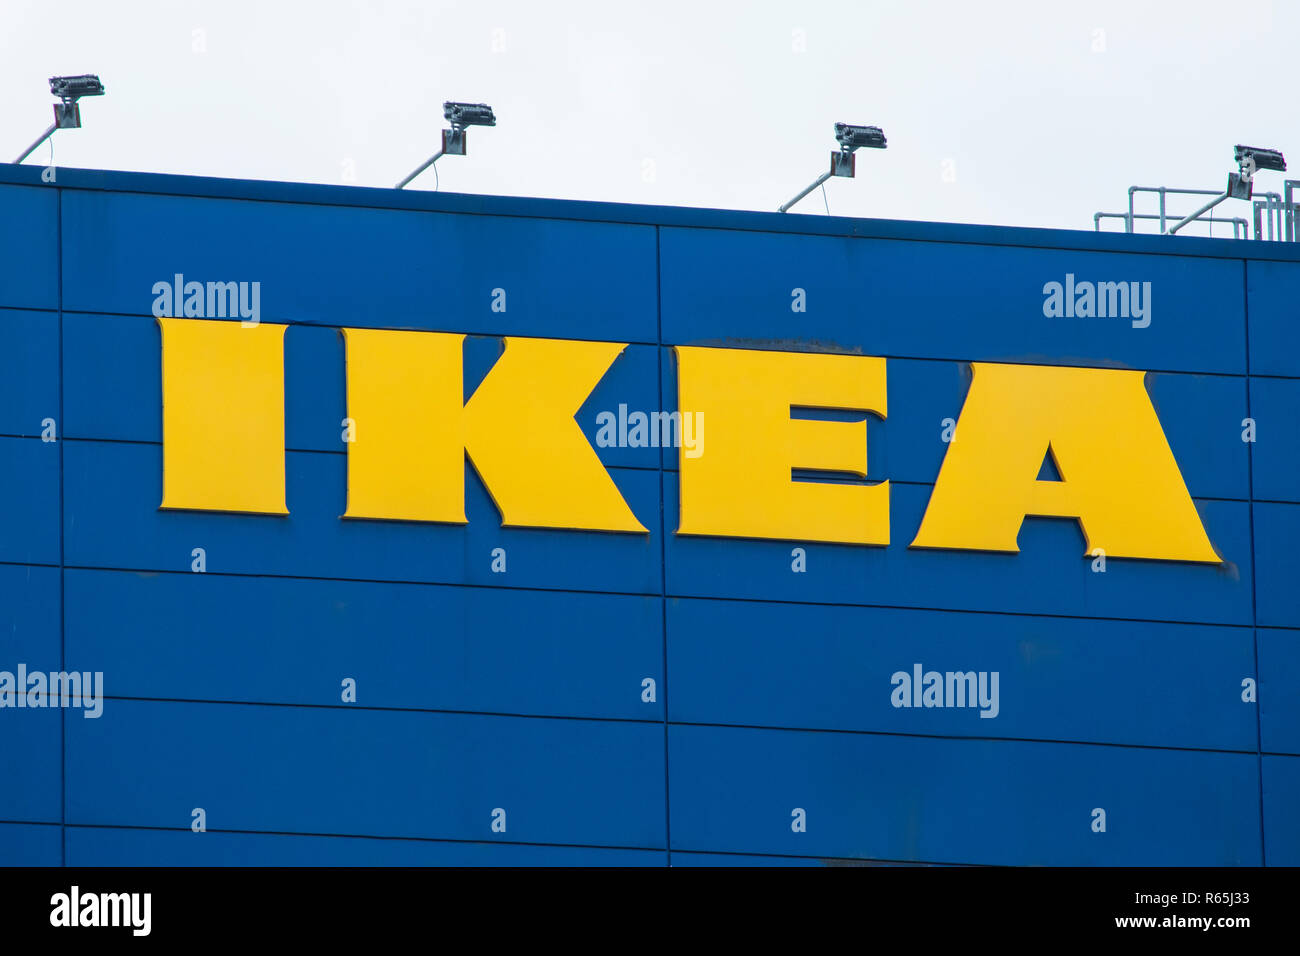 COVENTRY, UK - JULY 26TH 2018: The IKEA sign on the exterior of one of their stores in the UK, on 26th July 2018. Stock Photo